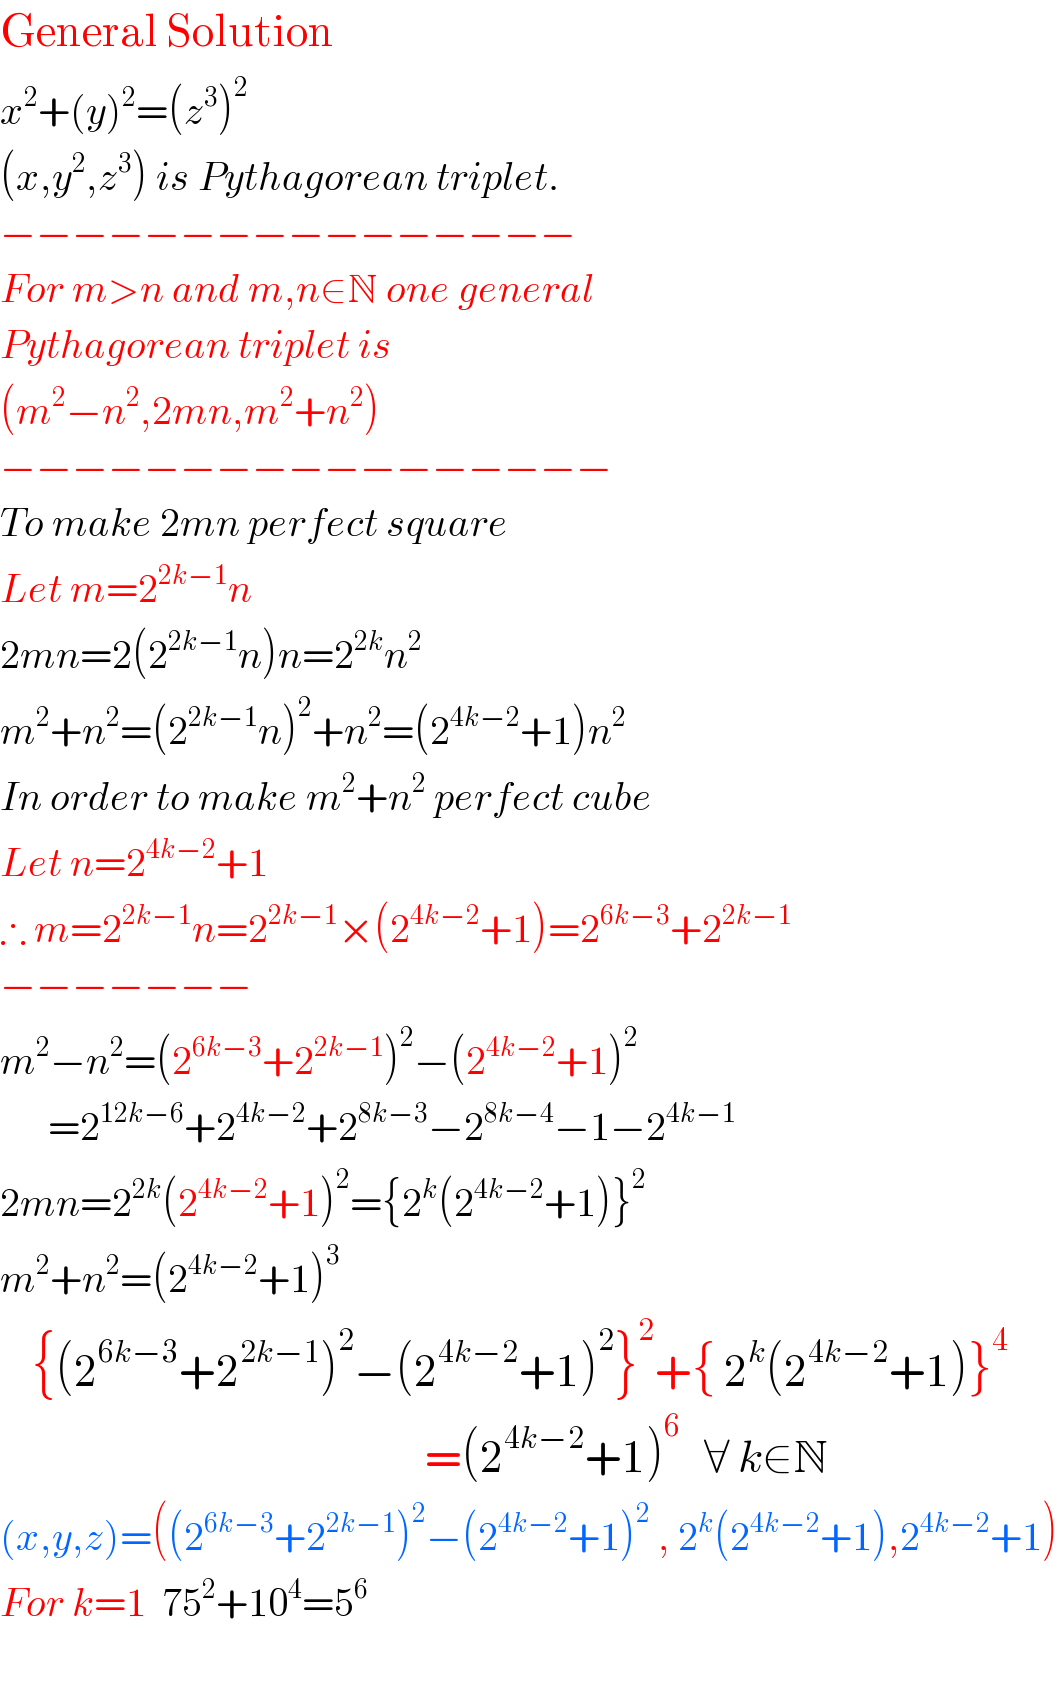 General Solution  x^2 +(y)^2 =(z^3 )^2   (x,y^2 ,z^3 ) is Pythagorean triplet.  −−−−−−−−−−−−−−−−  For m>n and m,n∈N one general  Pythagorean triplet is  (m^2 −n^2 ,2mn,m^2 +n^2 )  −−−−−−−−−−−−−−−−−  To make 2mn perfect square  Let m=2^(2k−1) n  2mn=2(2^(2k−1) n)n=2^(2k) n^2   m^2 +n^2 =(2^(2k−1) n)^2 +n^2 =(2^(4k−2) +1)n^2   In order to make m^2 +n^2  perfect cube  Let n=2^(4k−2) +1  ∴ m=2^(2k−1) n=2^(2k−1) ×(2^(4k−2) +1)=2^(6k−3) +2^(2k−1)   −−−−−−−  m^2 −n^2 =(2^(6k−3) +2^(2k−1) )^2 −(2^(4k−2) +1)^2         =2^(12k−6) +2^(4k−2) +2^(8k−3) −2^(8k−4) −1−2^(4k−1)   2mn=2^(2k) (2^(4k−2) +1)^2 ={2^k (2^(4k−2) +1)}^2   m^2 +n^2 =(2^(4k−2) +1)^3       {(2^(6k−3) +2^(2k−1) )^2 −(2^(4k−2) +1)^2 }^2 +{ 2^k (2^(4k−2) +1)}^4                                                             =(2^(4k−2) +1)^6    ∀ k∈N  (x,y,z)=((2^(6k−3) +2^(2k−1) )^2 −(2^(4k−2) +1)^2  , 2^k (2^(4k−2) +1),2^(4k−2) +1)  For k=1  75^2 +10^4 =5^6     